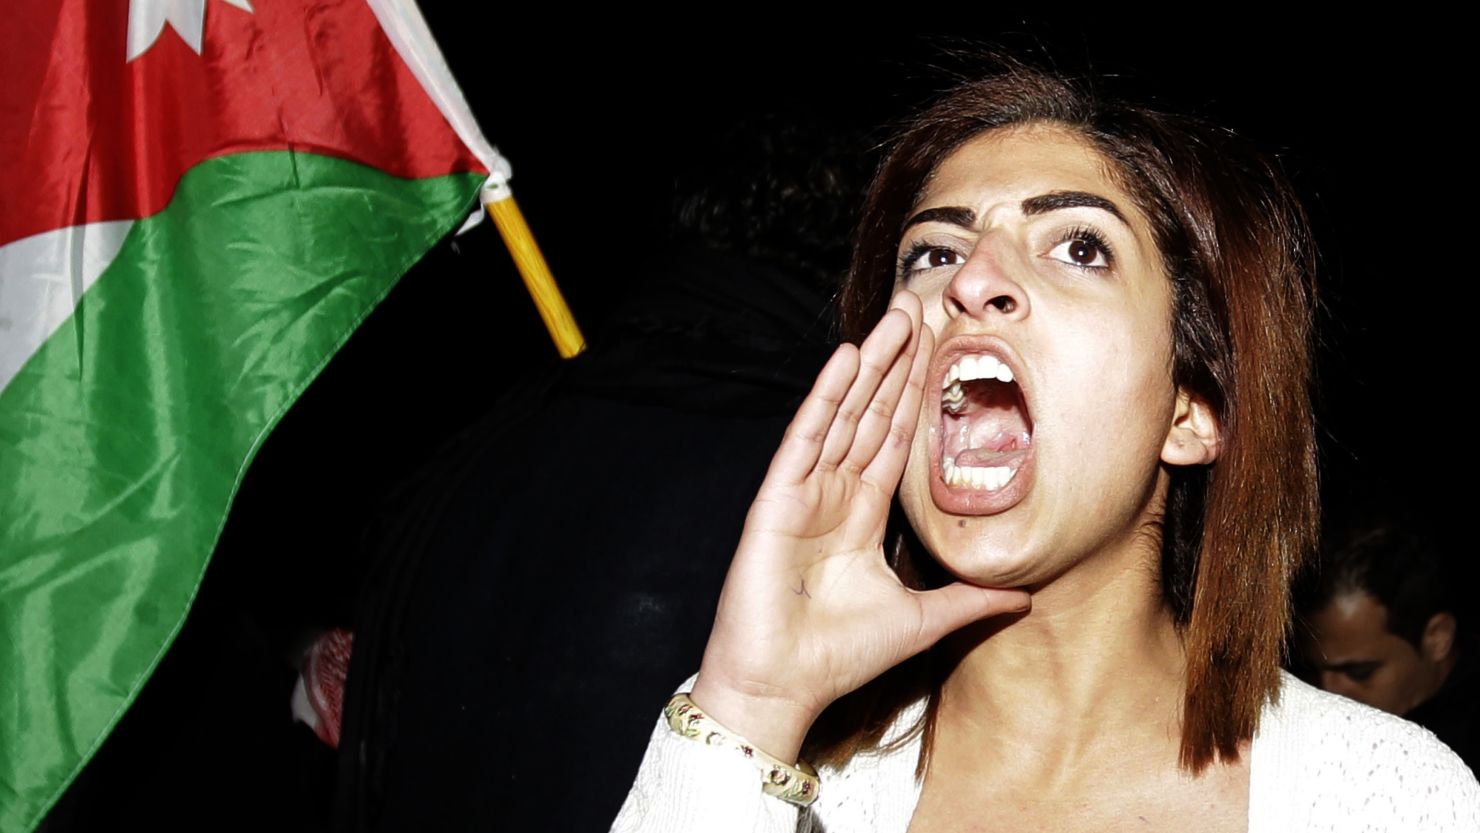 A protest in front of the Israeli embassy to demand the deportation of the Israeli ambassador, on March 10, 2014, in Amman.